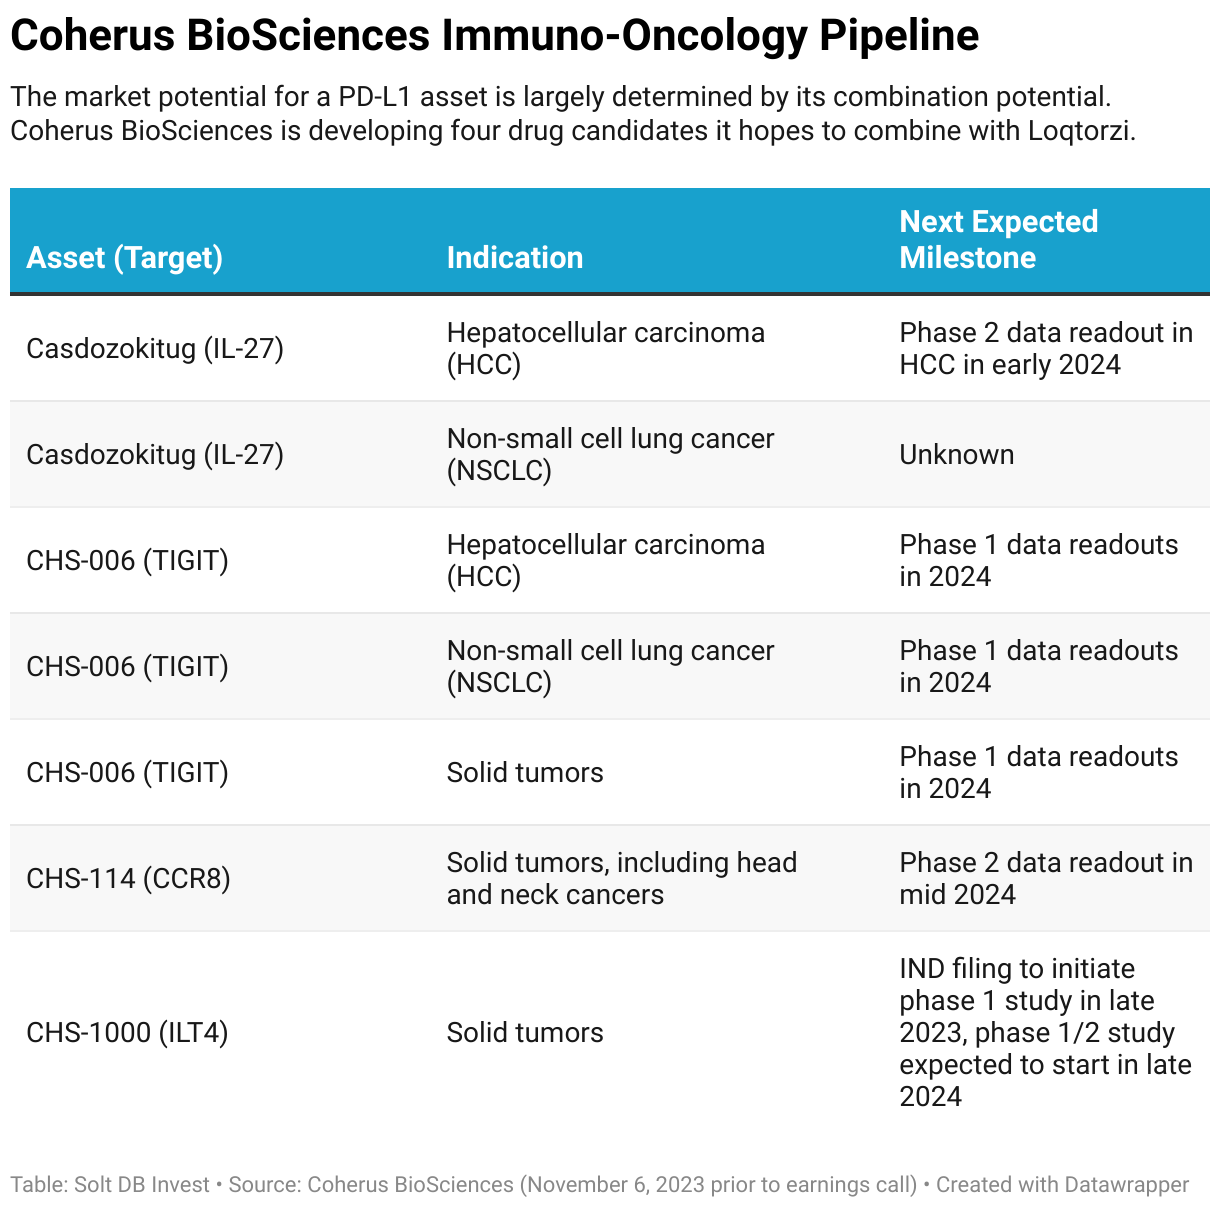 A table showing the immuno-oncology pipeline of Coherus BioSciences by asset, indication, and next expected milestone.